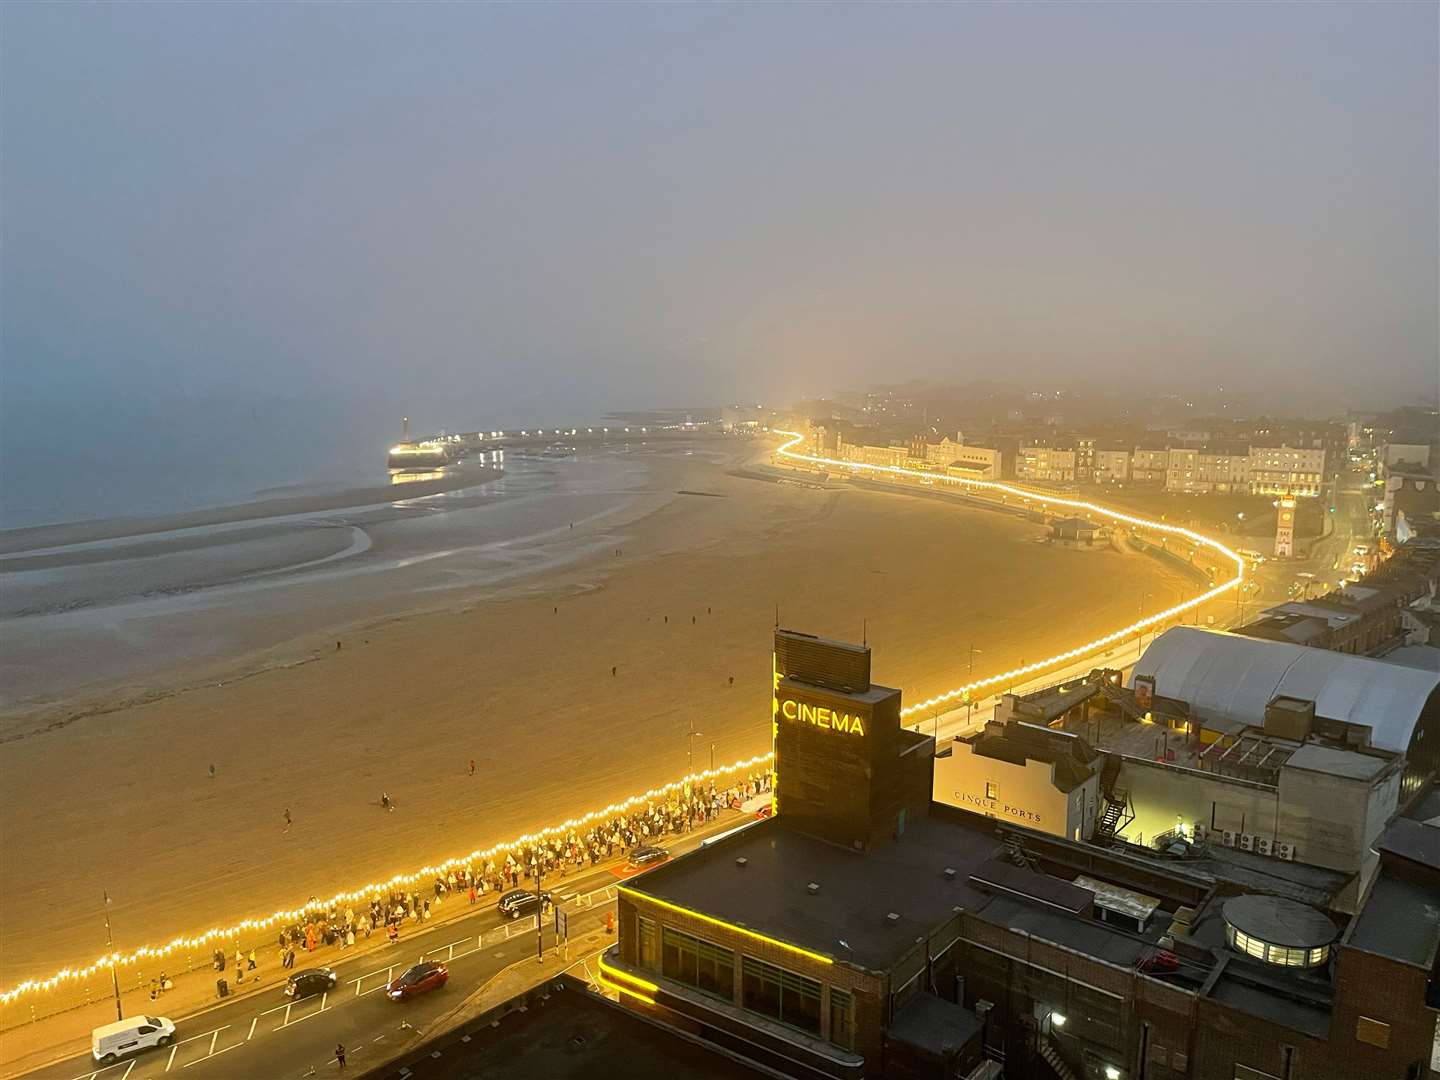 Margate seafront was decked in lights for the Sam Mendes movie. Picture: Paul Johnson